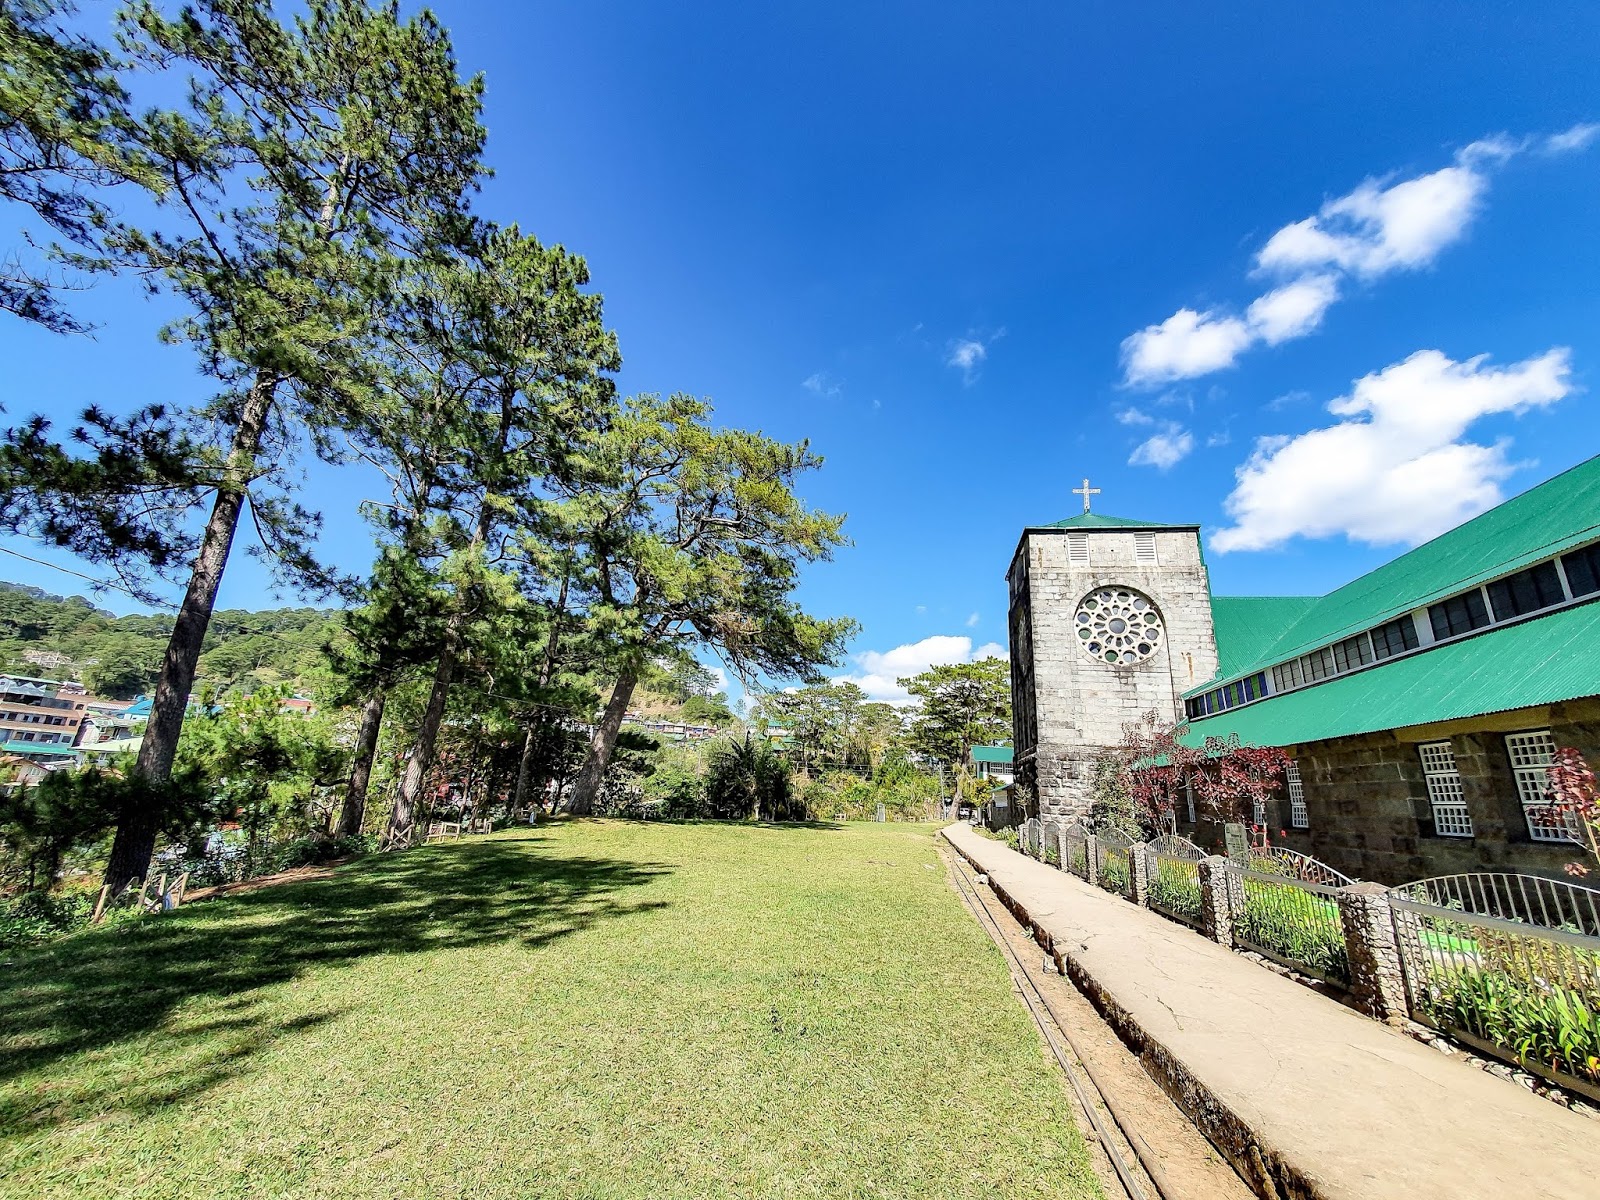 An over-the-weekend getaway in Sagada, Mountain Province + 2D/1N Itinerary (Relax Edition),Luzon, Mountain Province, Philippines, Sagada, Travel, weekend getaway, what to do in Sagada, where to eat in Sagada, 